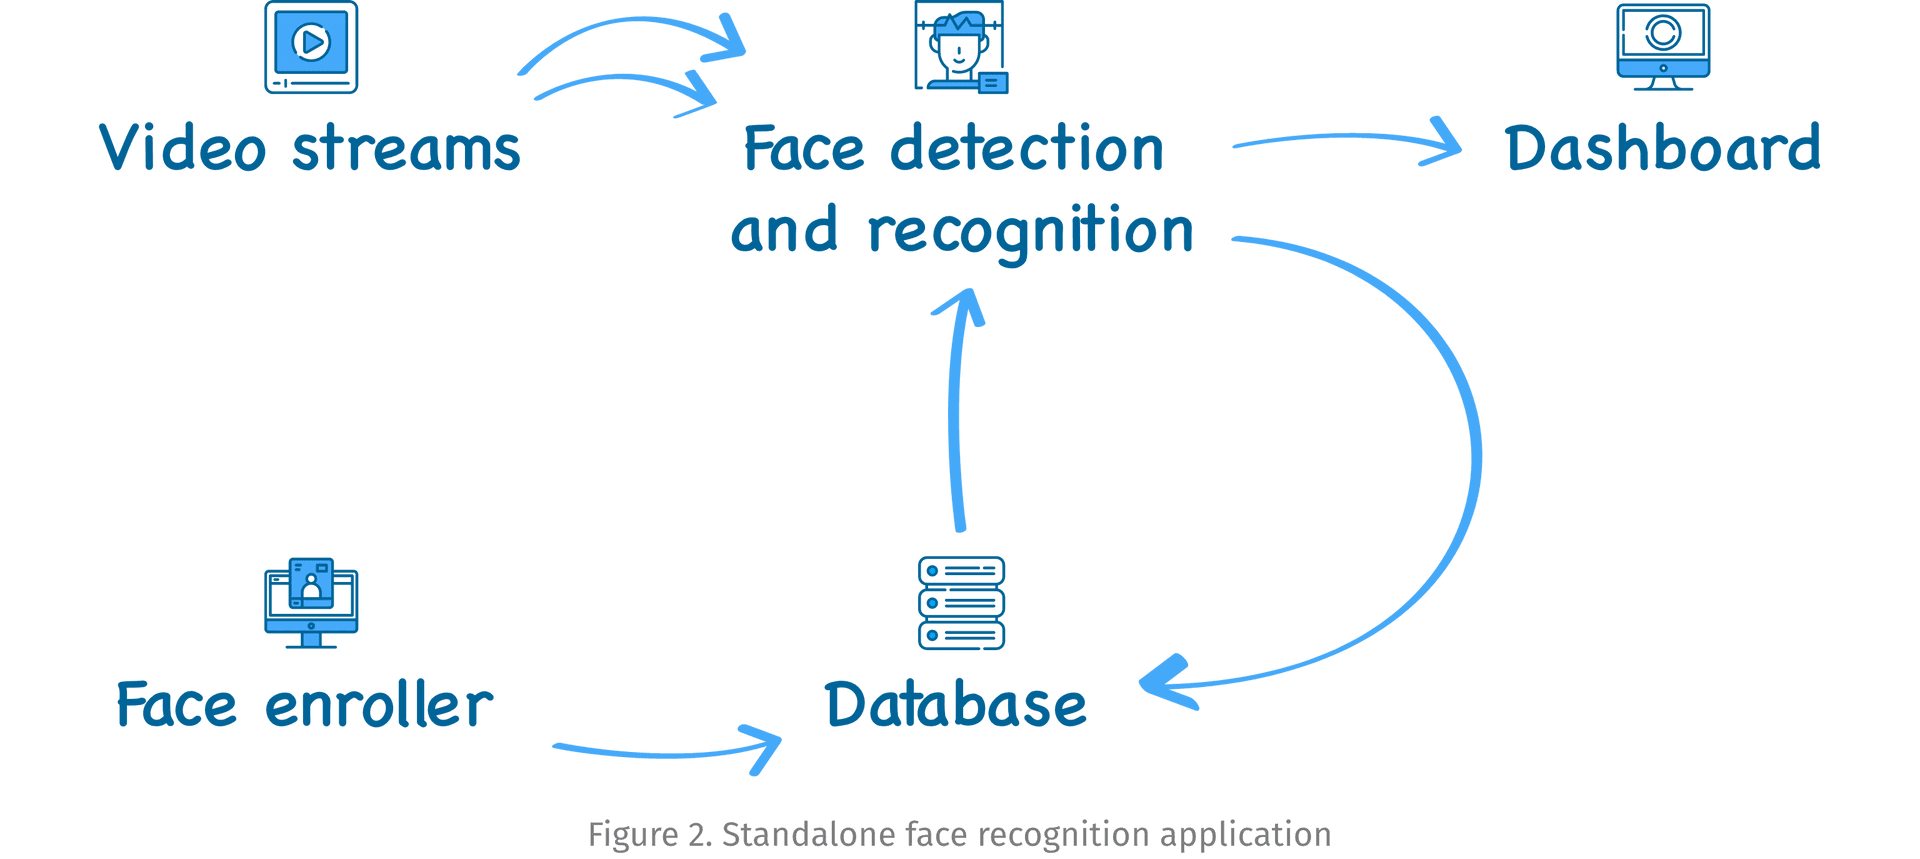 Standalone face recognition application